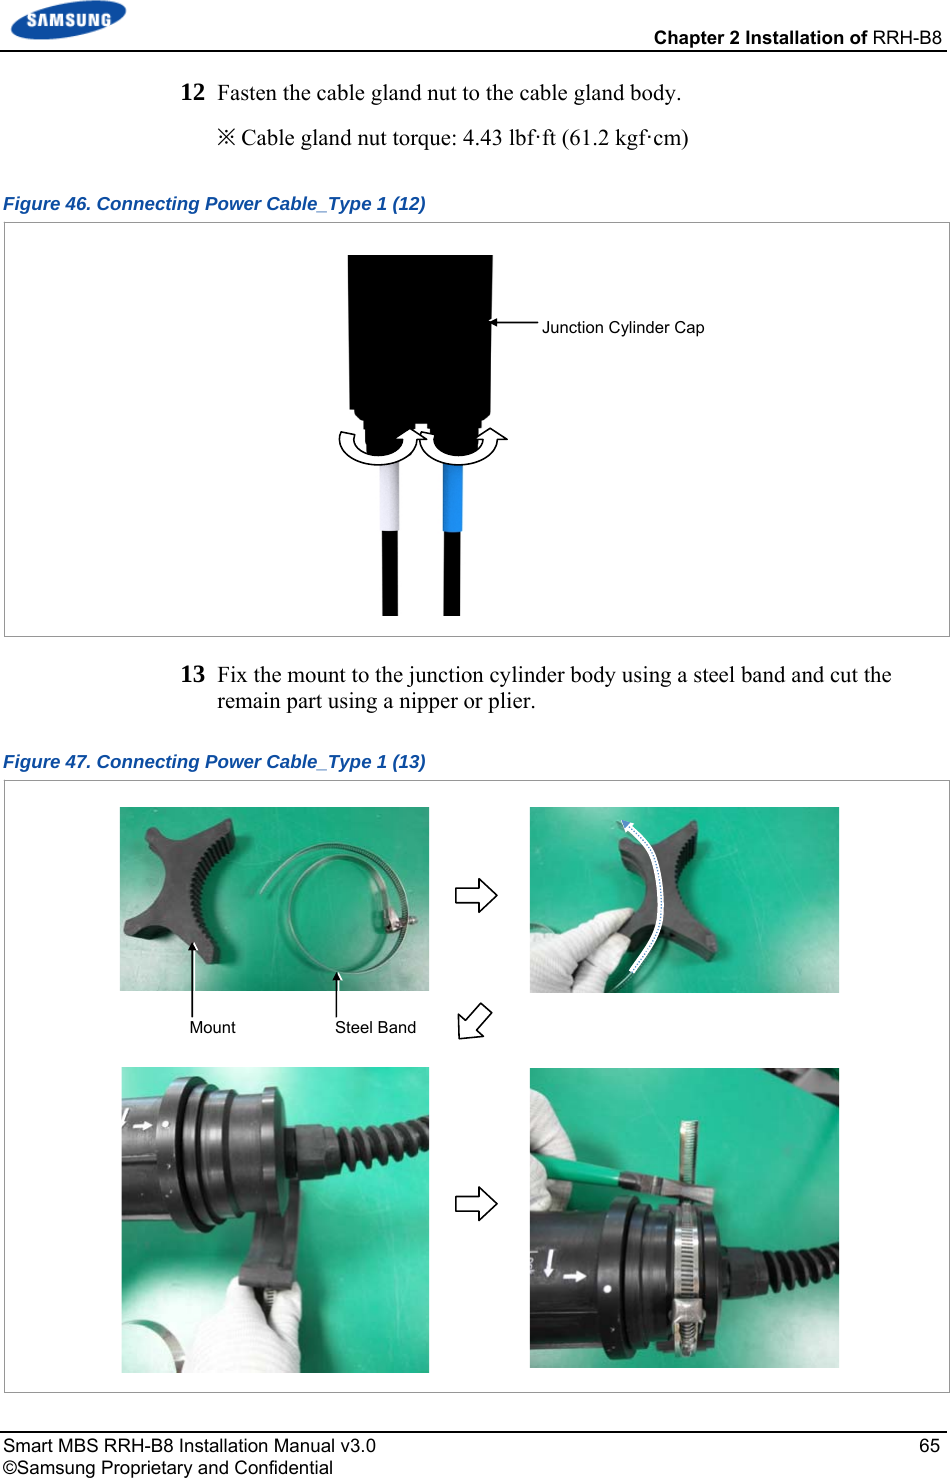  Chapter 2 Installation of RRH-B8 Smart MBS RRH-B8 Installation Manual v3.0   65 ©Samsung Proprietary and Confidential 12  Fasten the cable gland nut to the cable gland body. ※ Cable gland nut torque: 4.43 lbf·ft (61.2 kgf·cm) Figure 46. Connecting Power Cable_Type 1 (12)  13  Fix the mount to the junction cylinder body using a steel band and cut the remain part using a nipper or plier. Figure 47. Connecting Power Cable_Type 1 (13)  Mount  Steel BandJunction Cylinder Cap